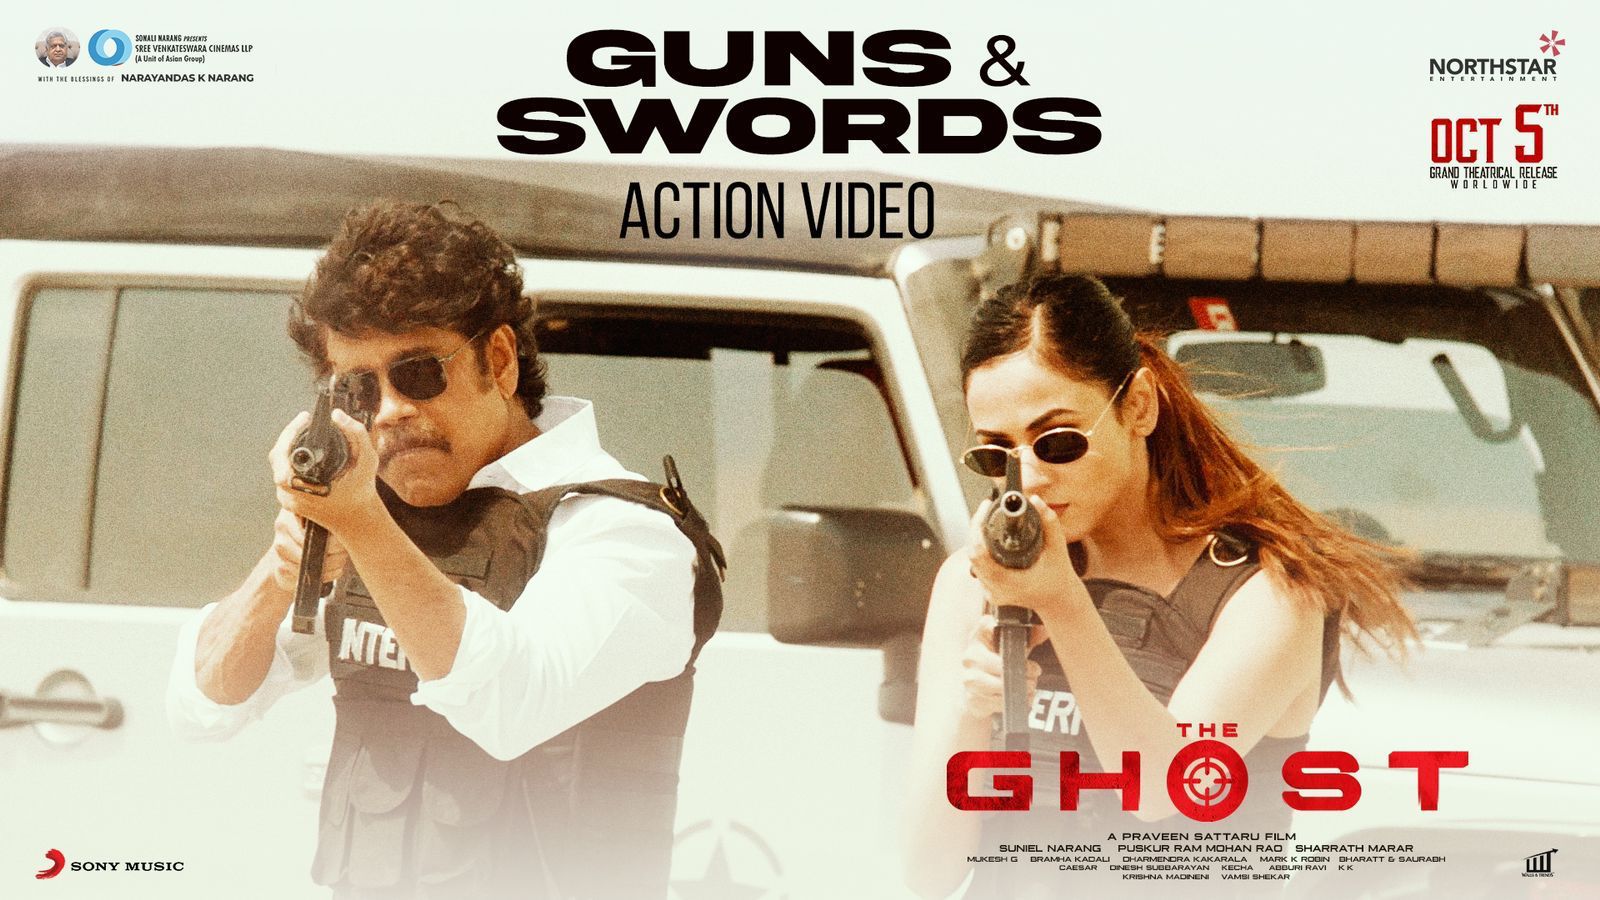 The Ghost: Nagarjuna plays with Guns and Swords